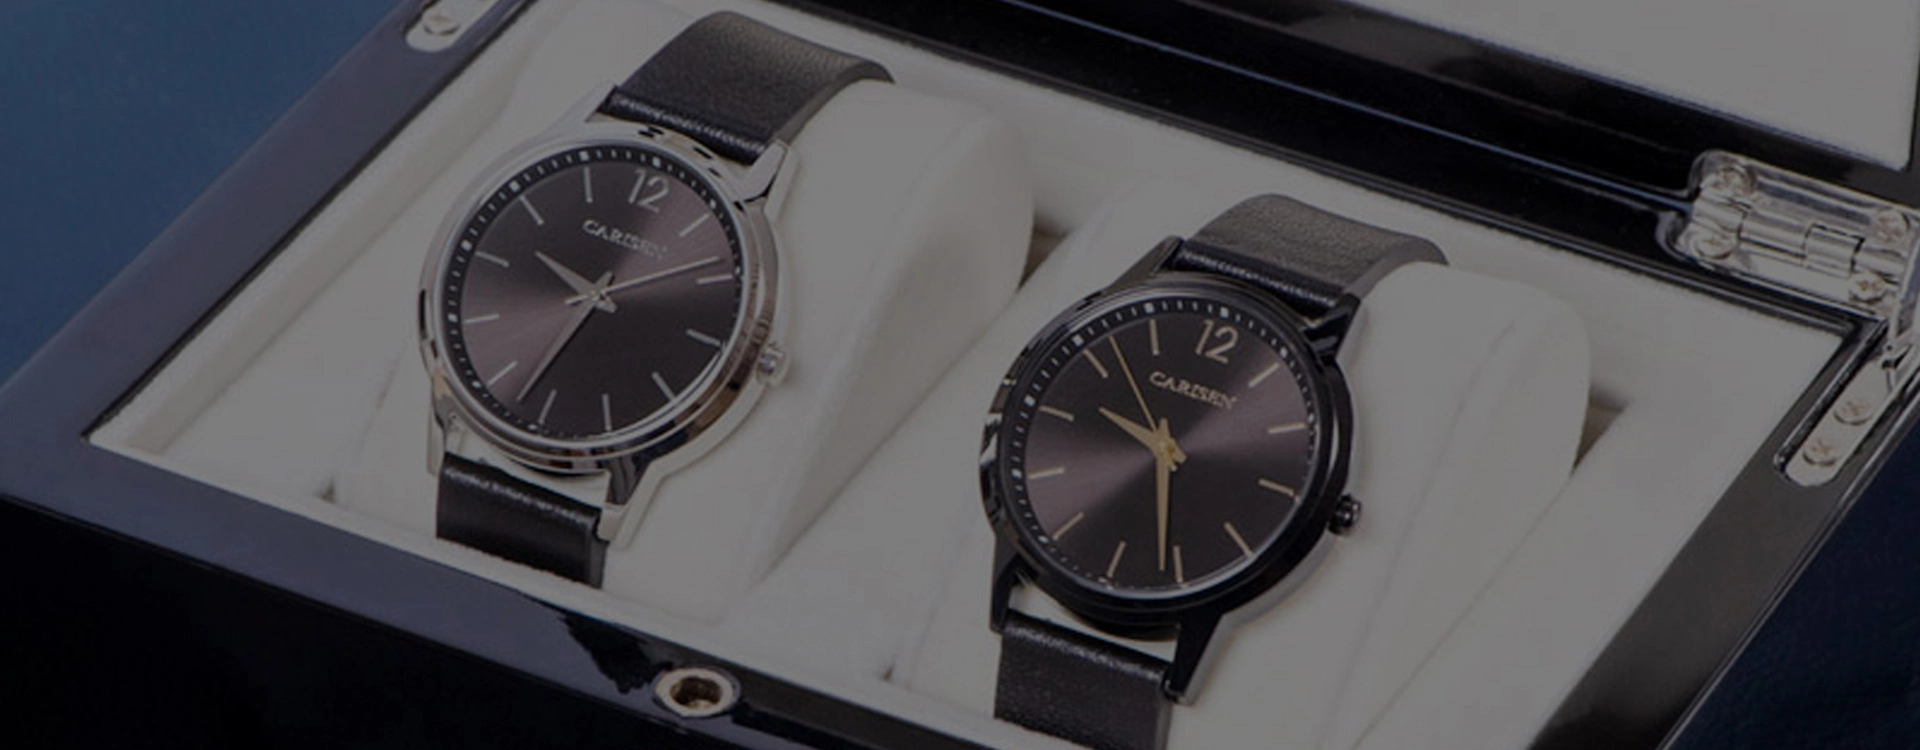 How an Analog Watch Works